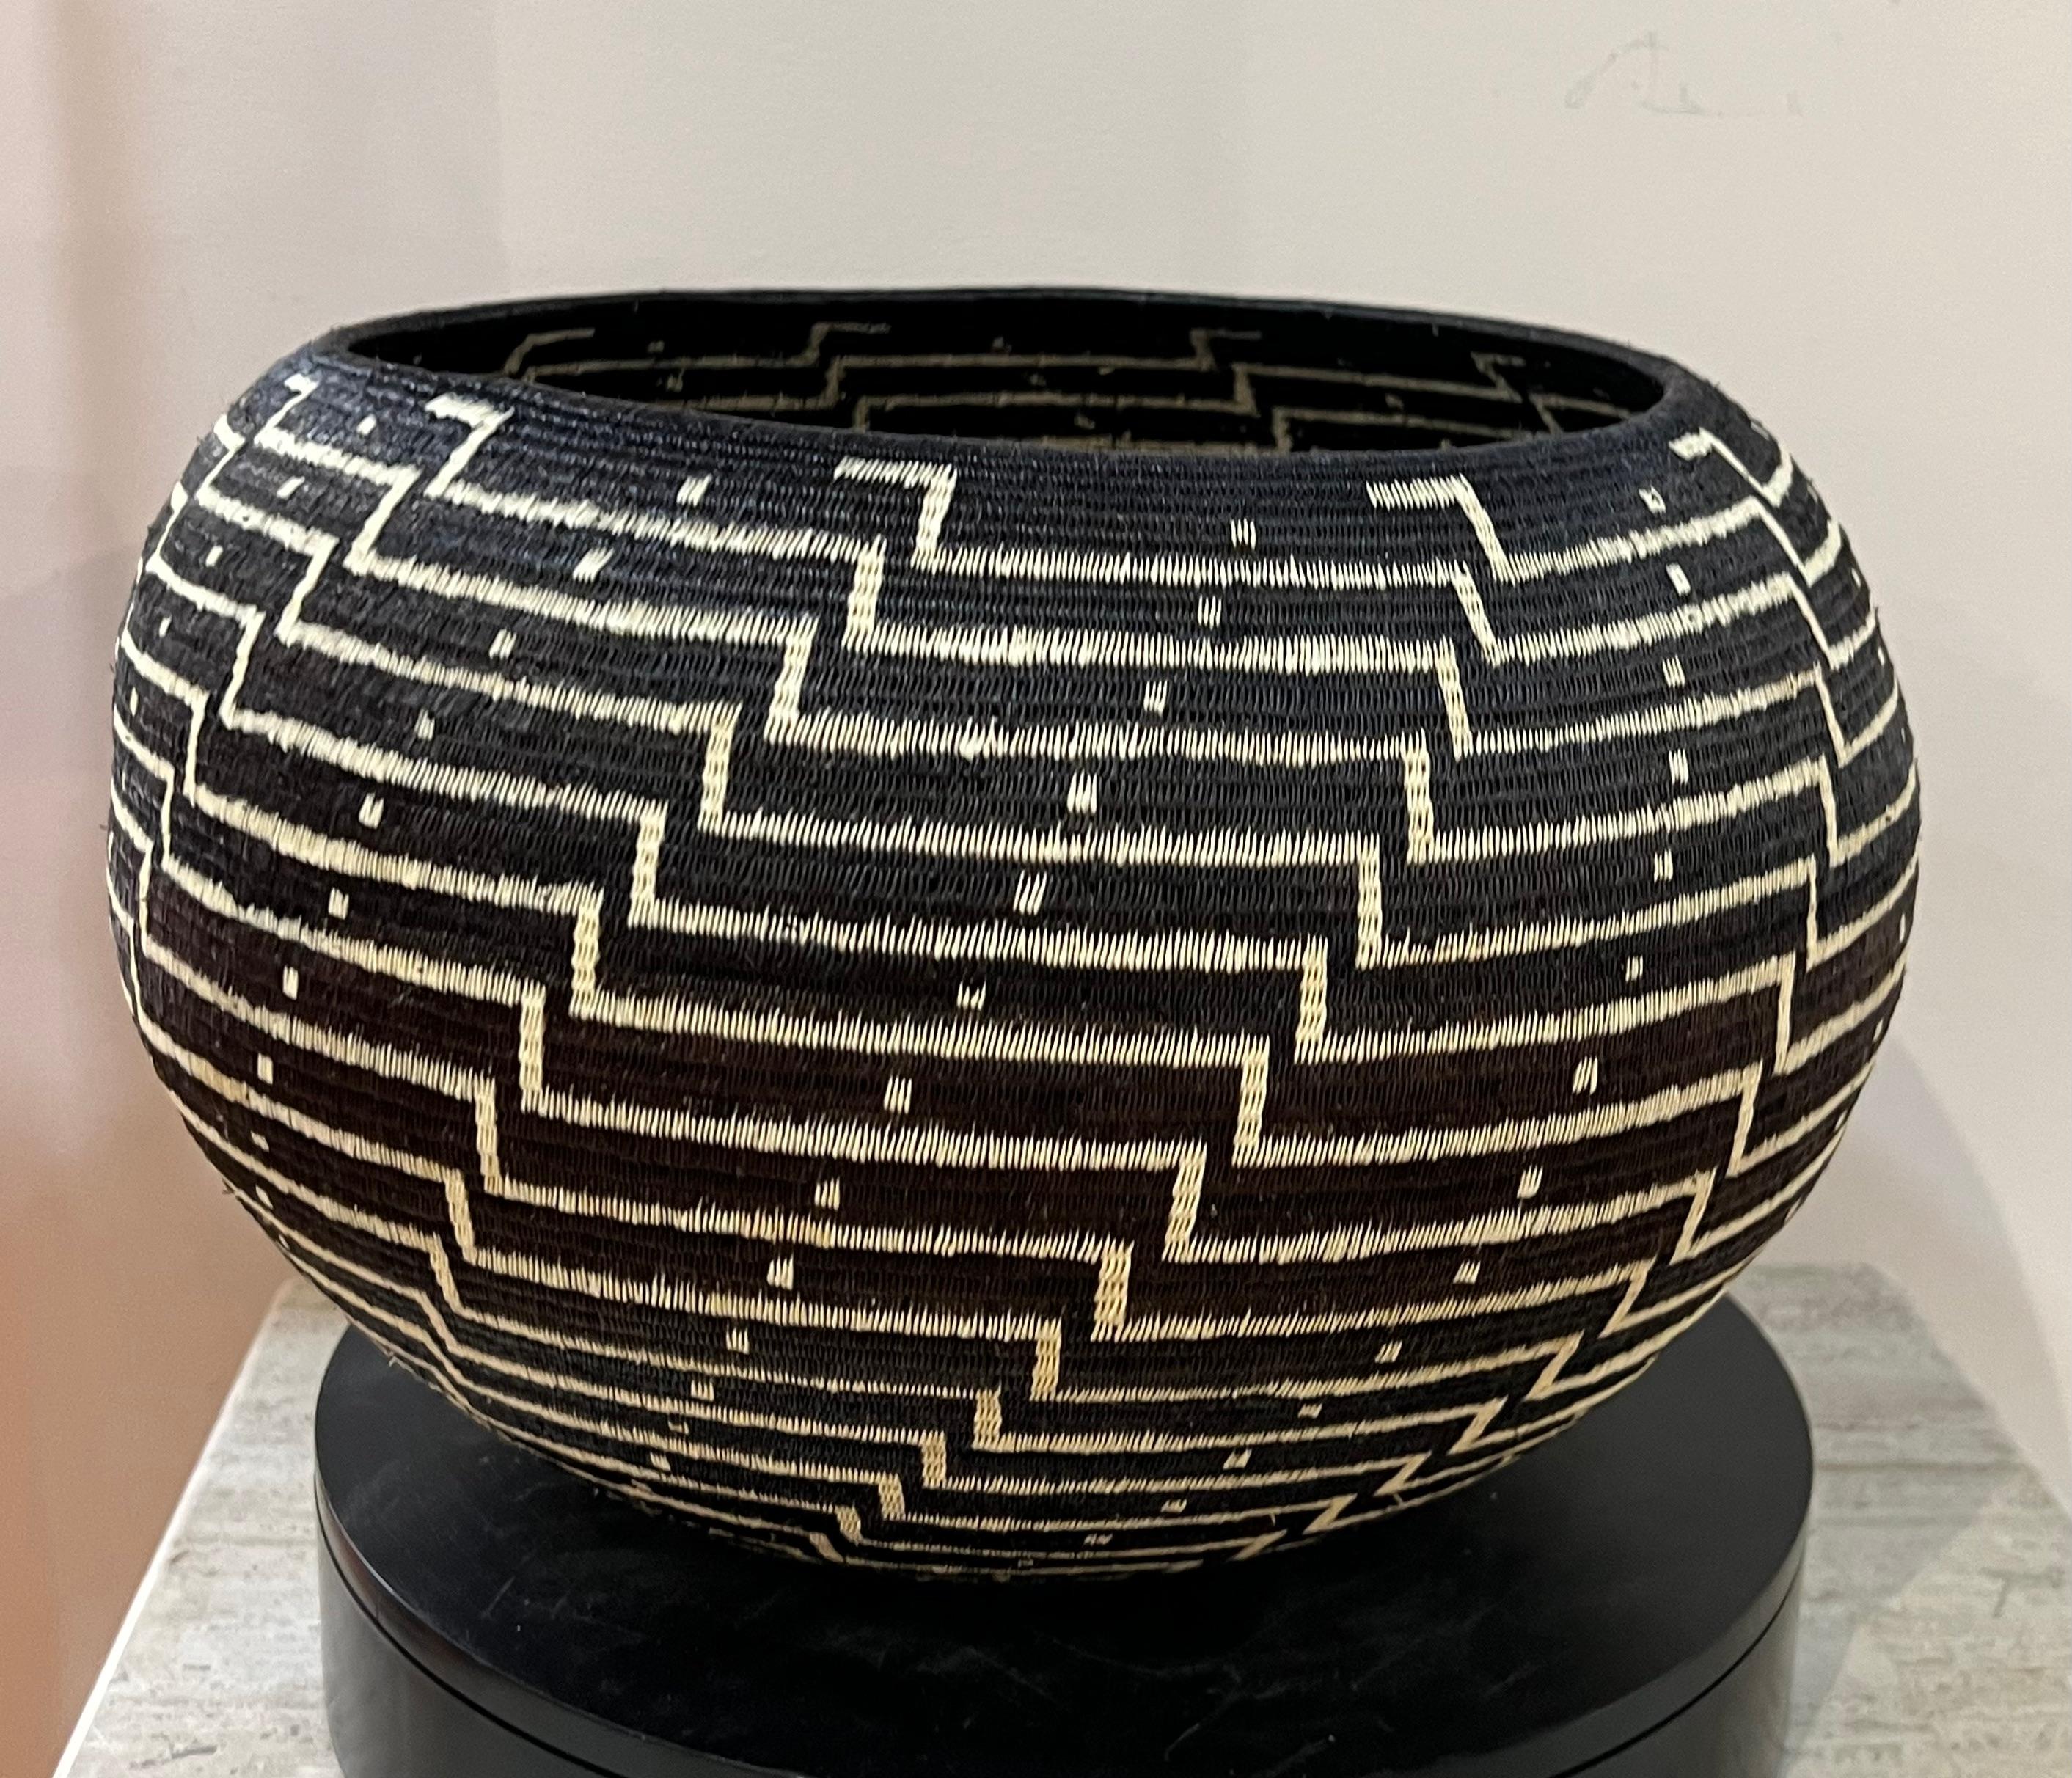 Black and White Basket, Wounaan Tribe, Panama, Rainforest, Geometric, Round - Contemporary Mixed Media Art by Unknown